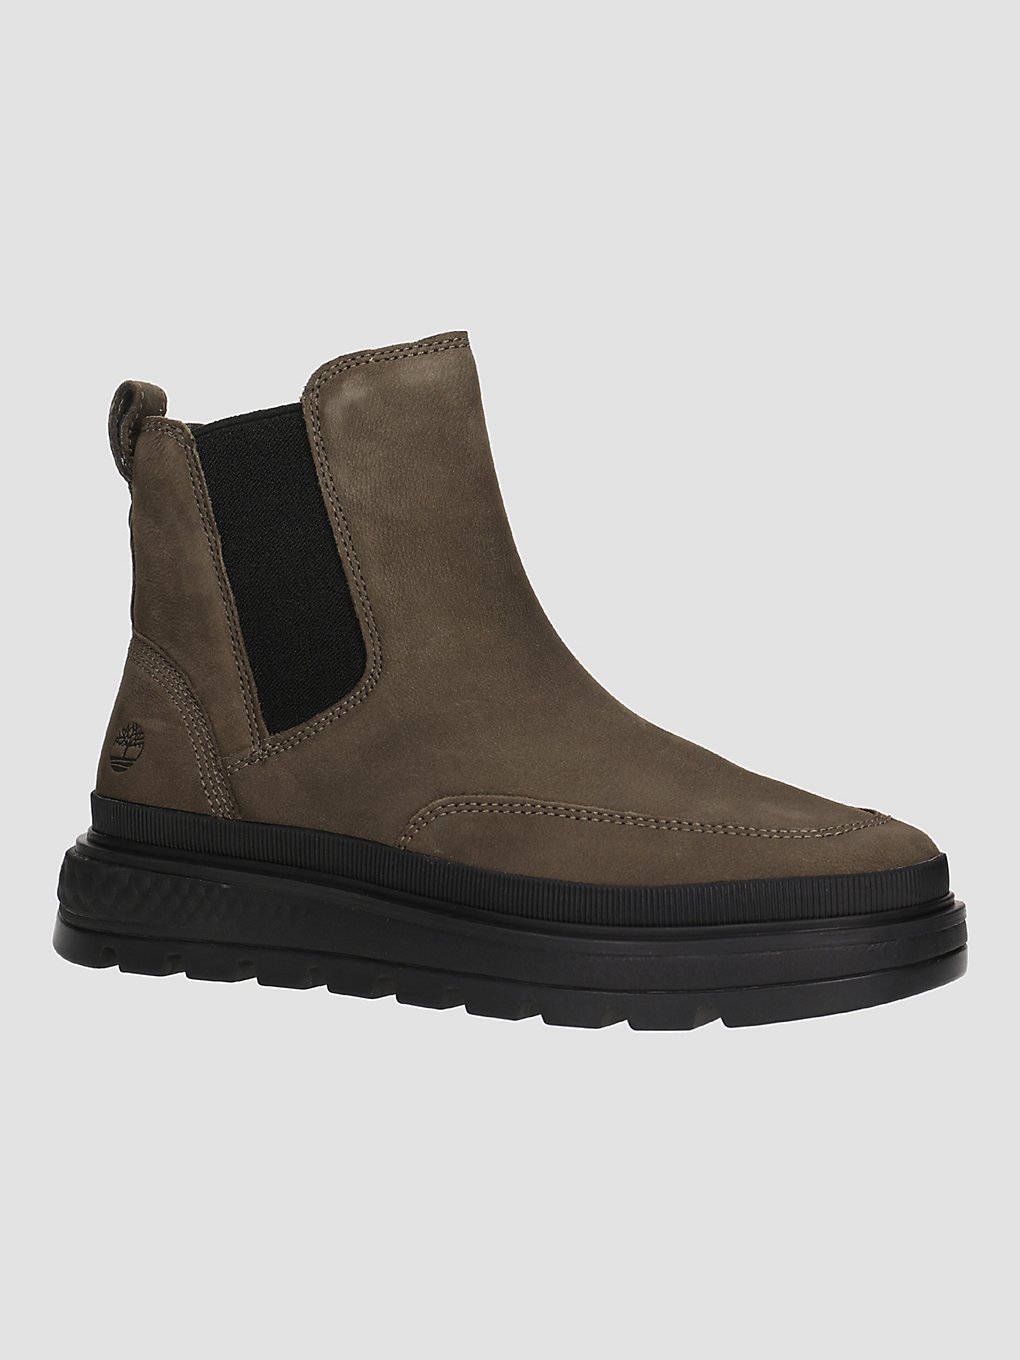 Timberland Ray City Chelsea Boots canteen